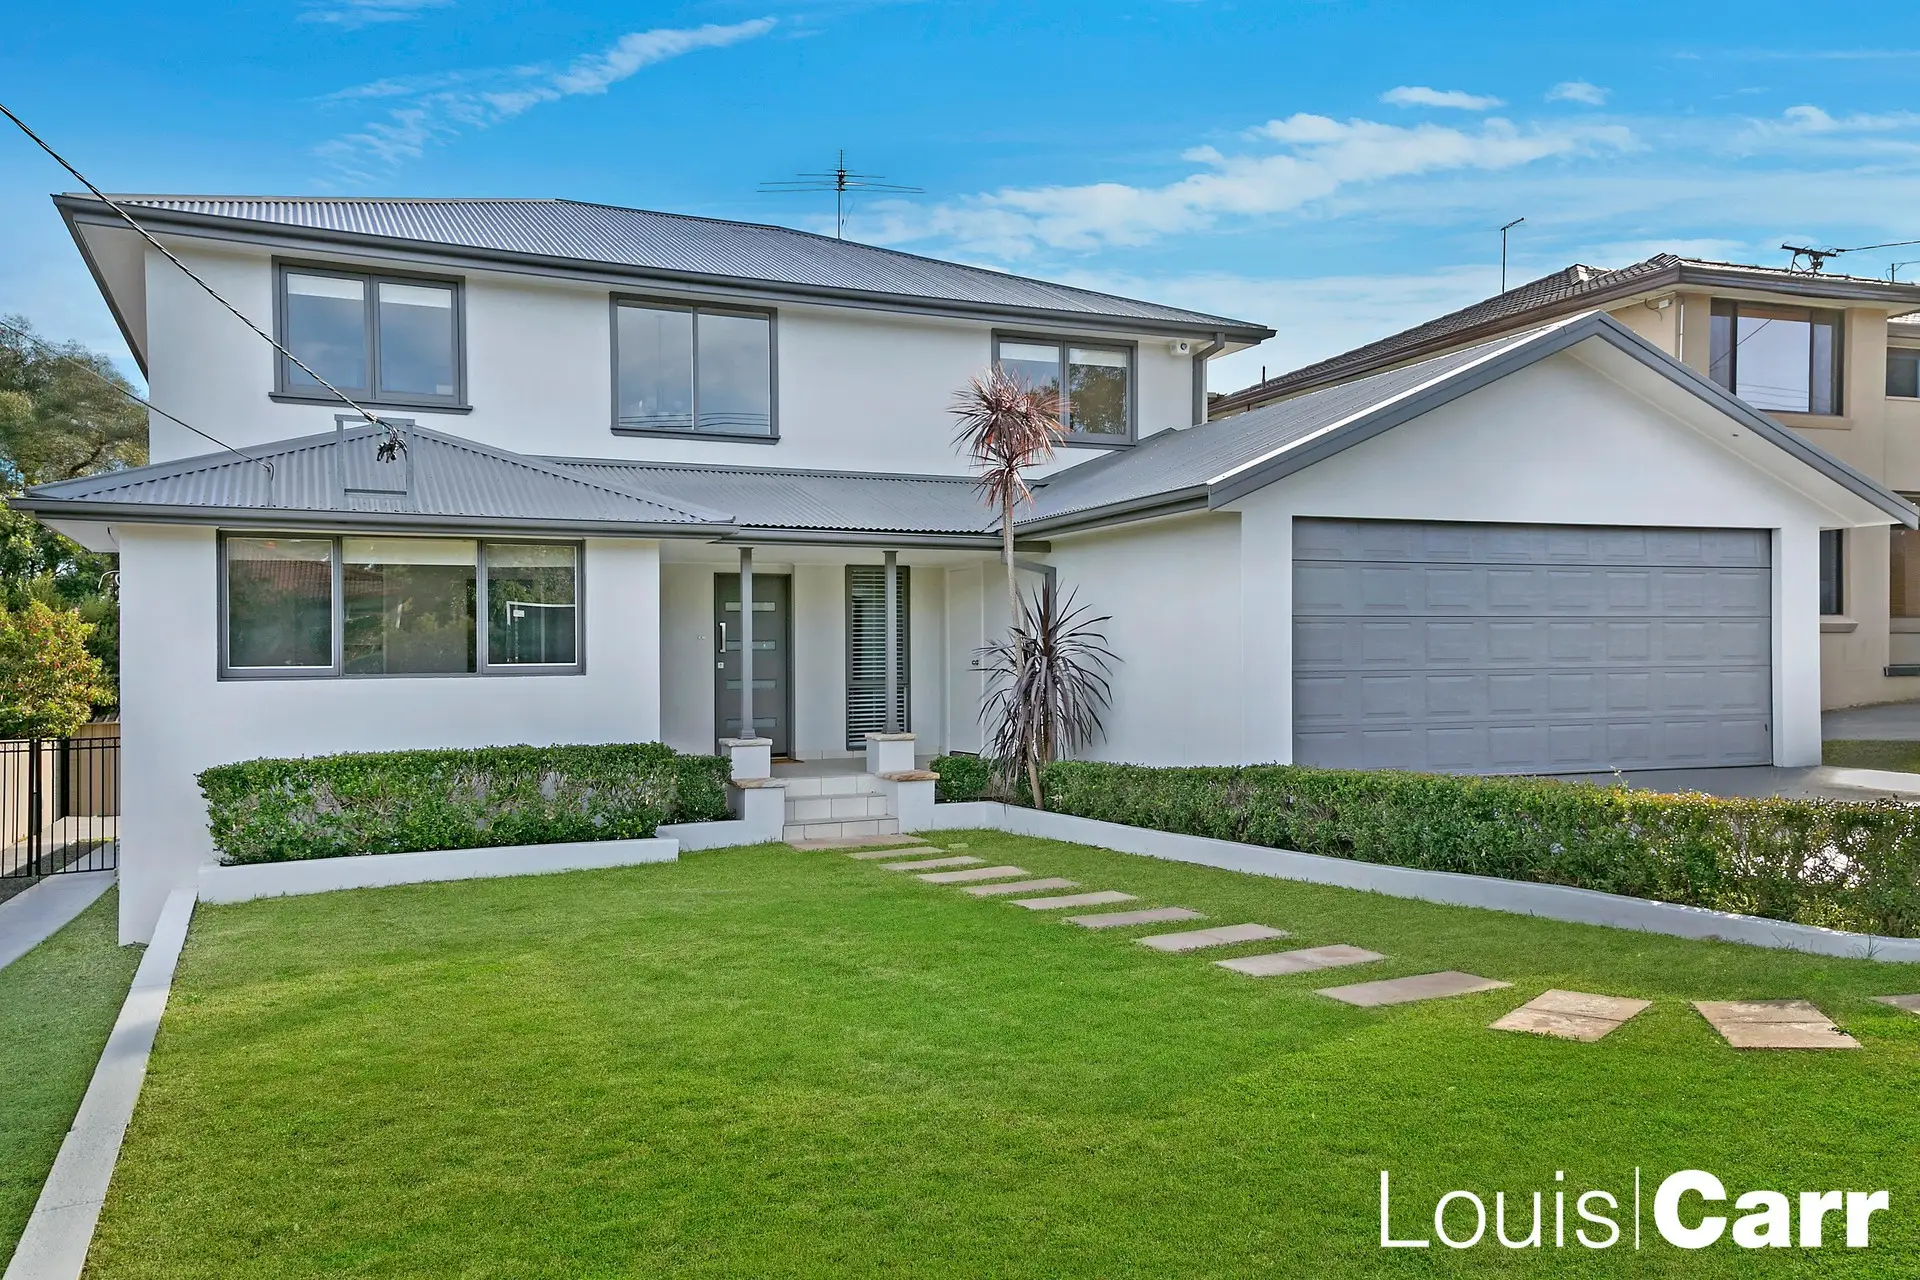 Photo #1: 94 Tamboura Avenue, Baulkham Hills - Sold by Louis Carr Real Estate